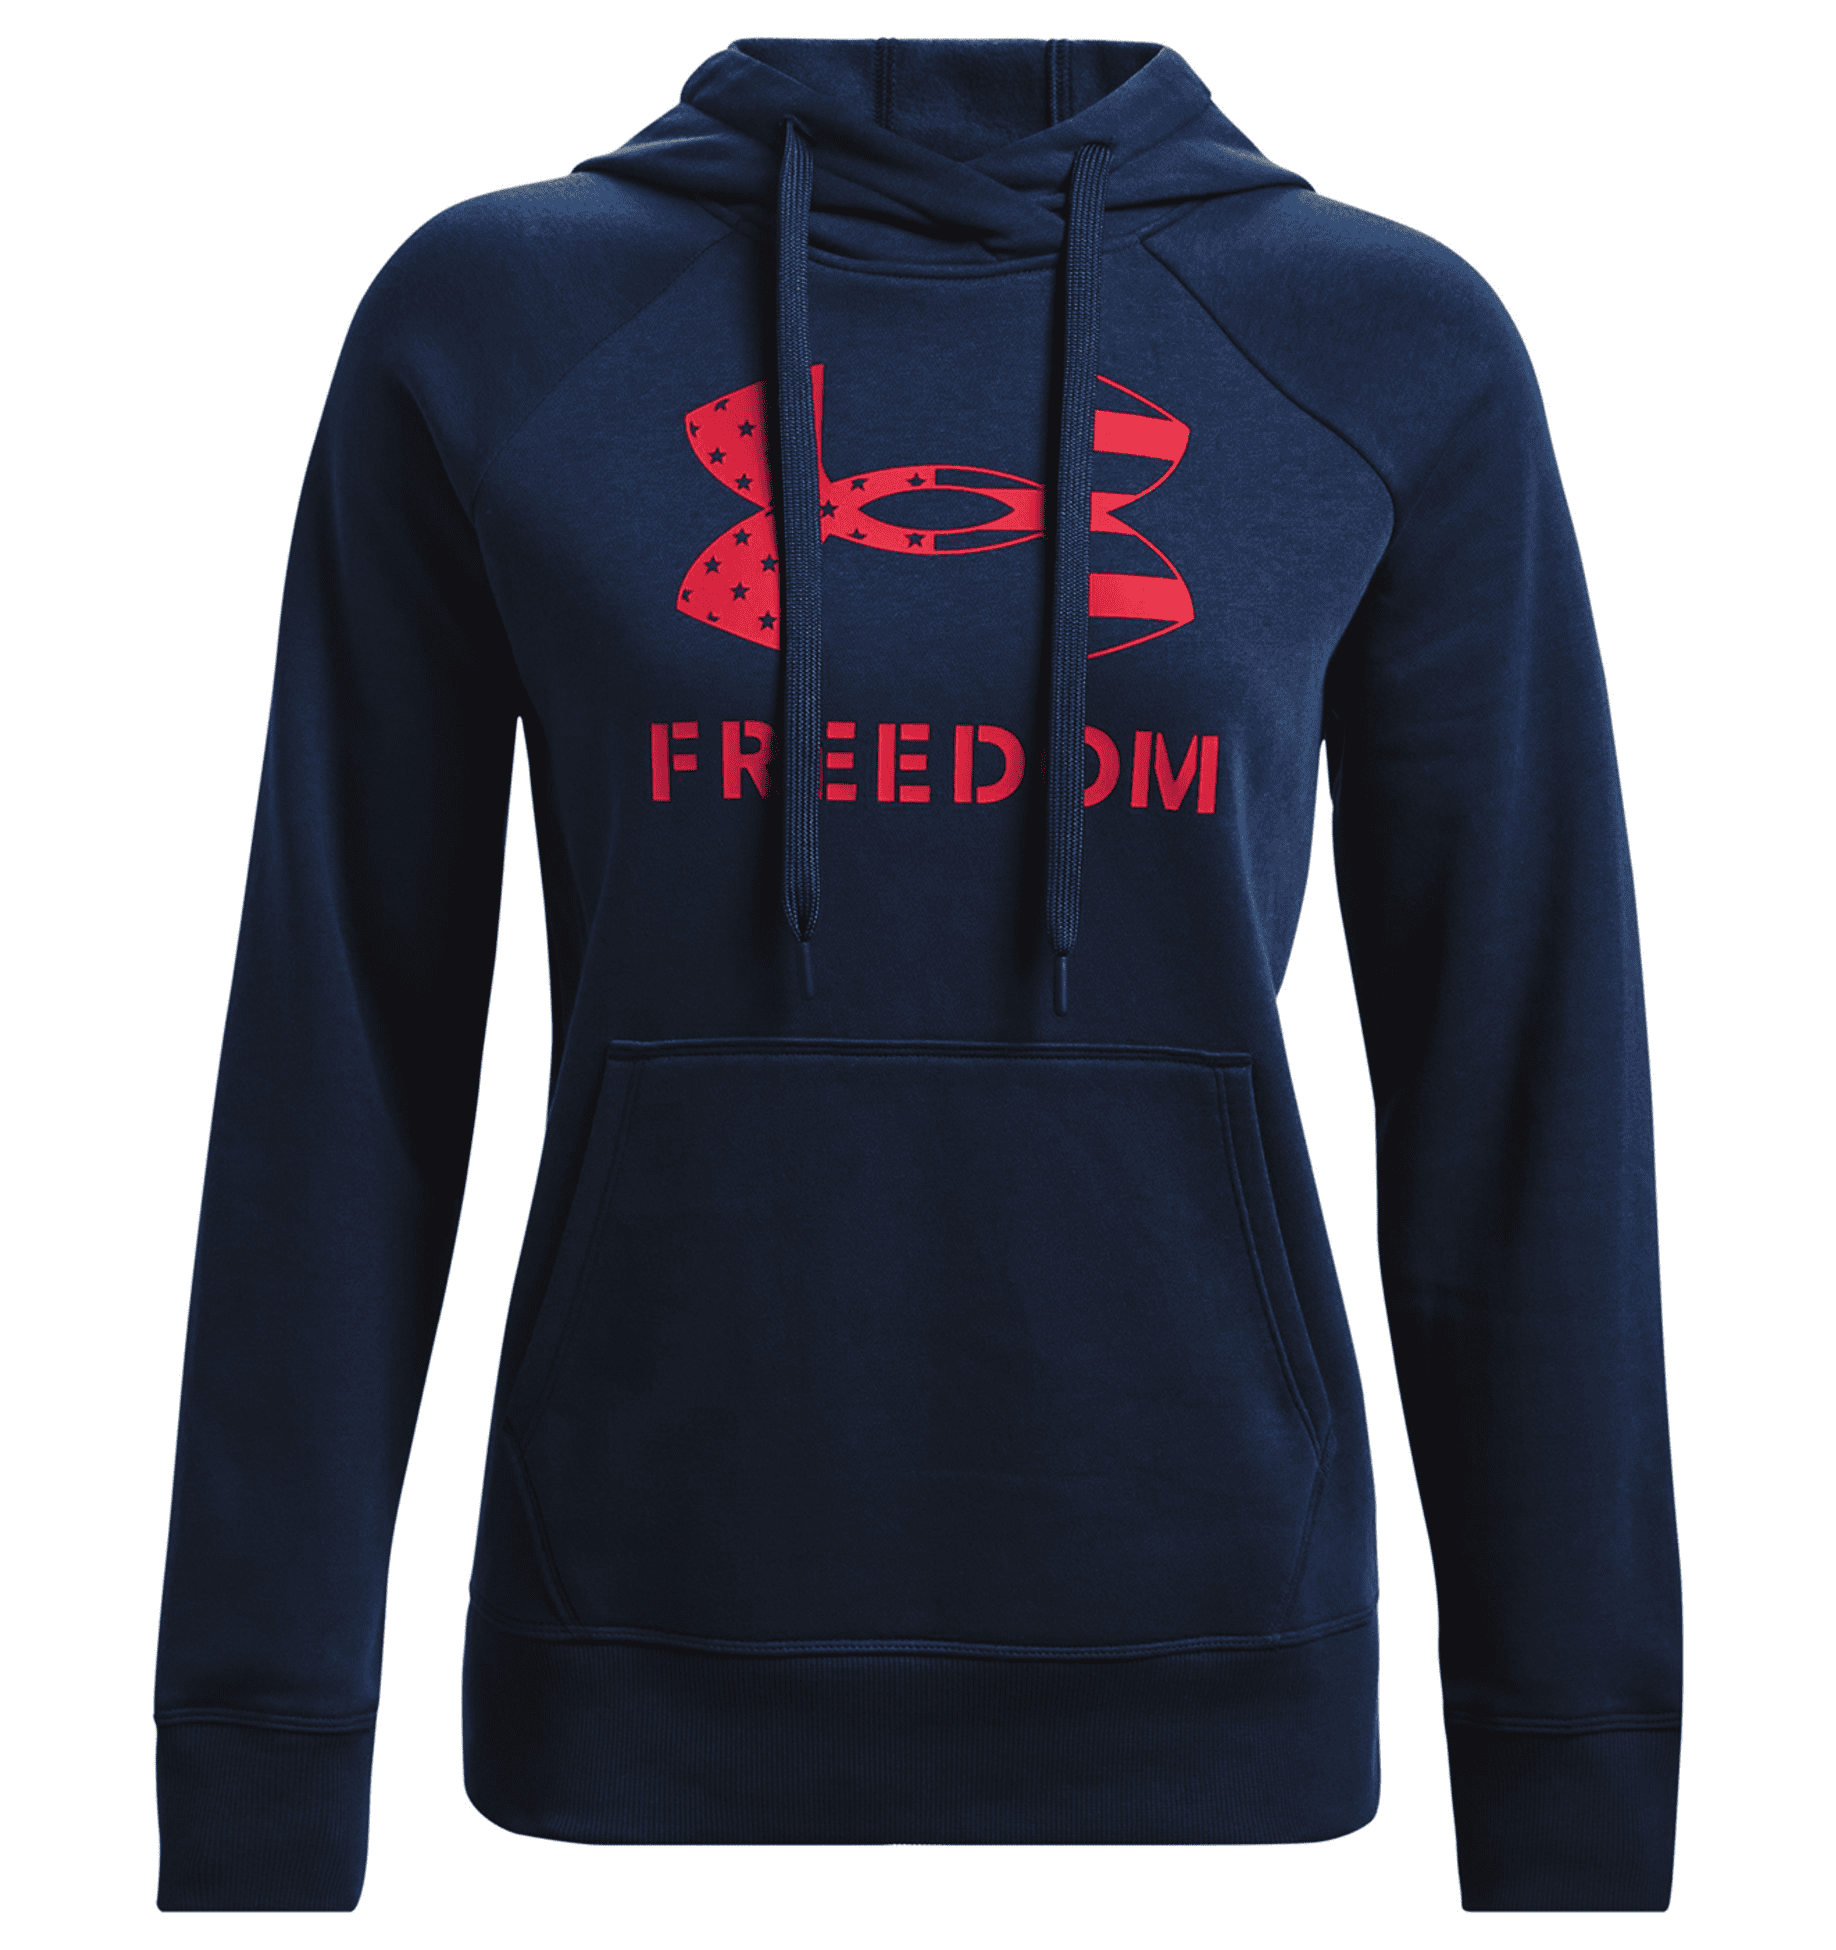 Under Armour Women's UA Freedom Rival Hoodie 1370026 - Academy, 2XL